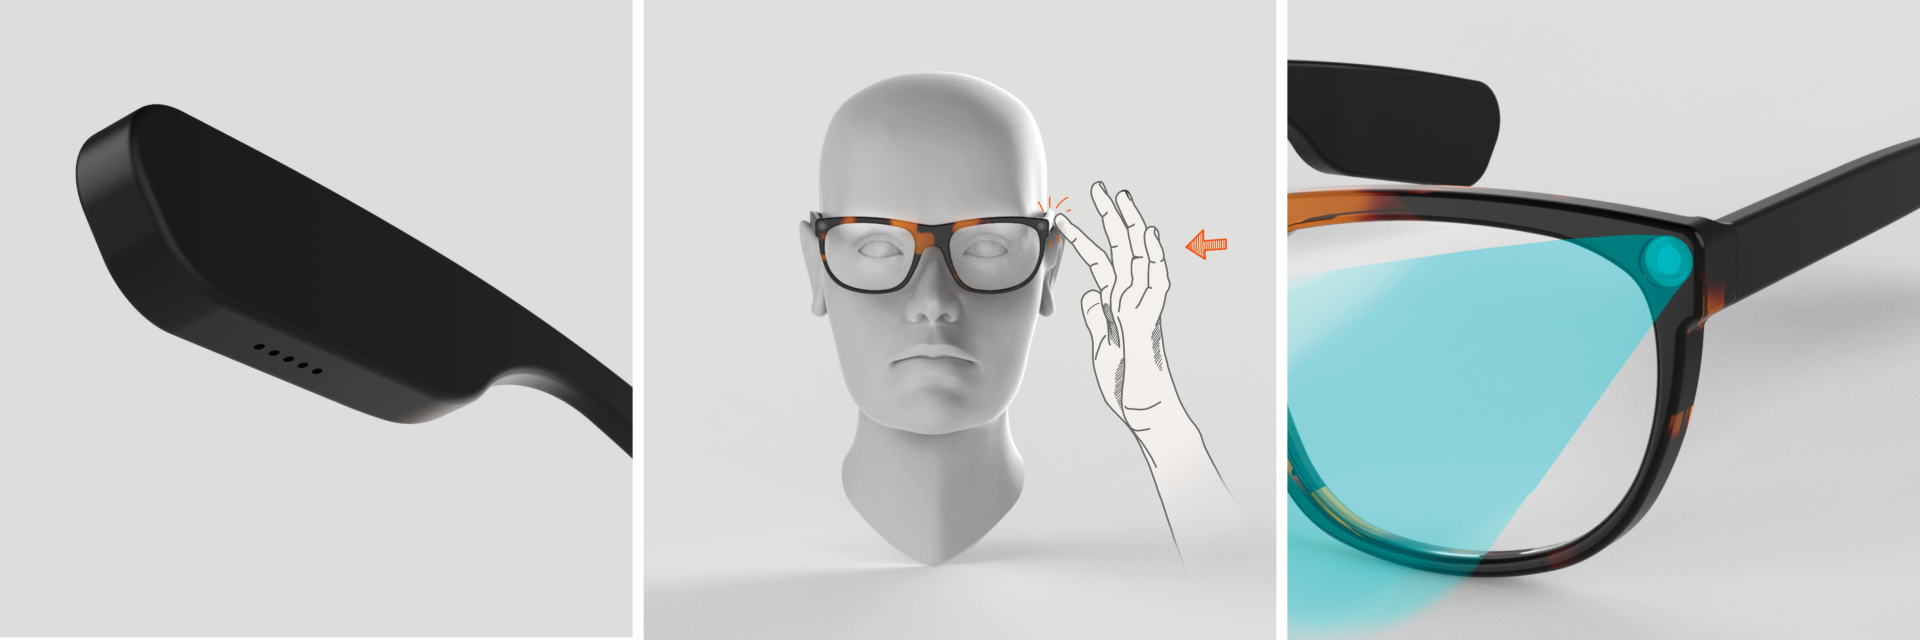 Renders of smart glasses with a human model wearing them